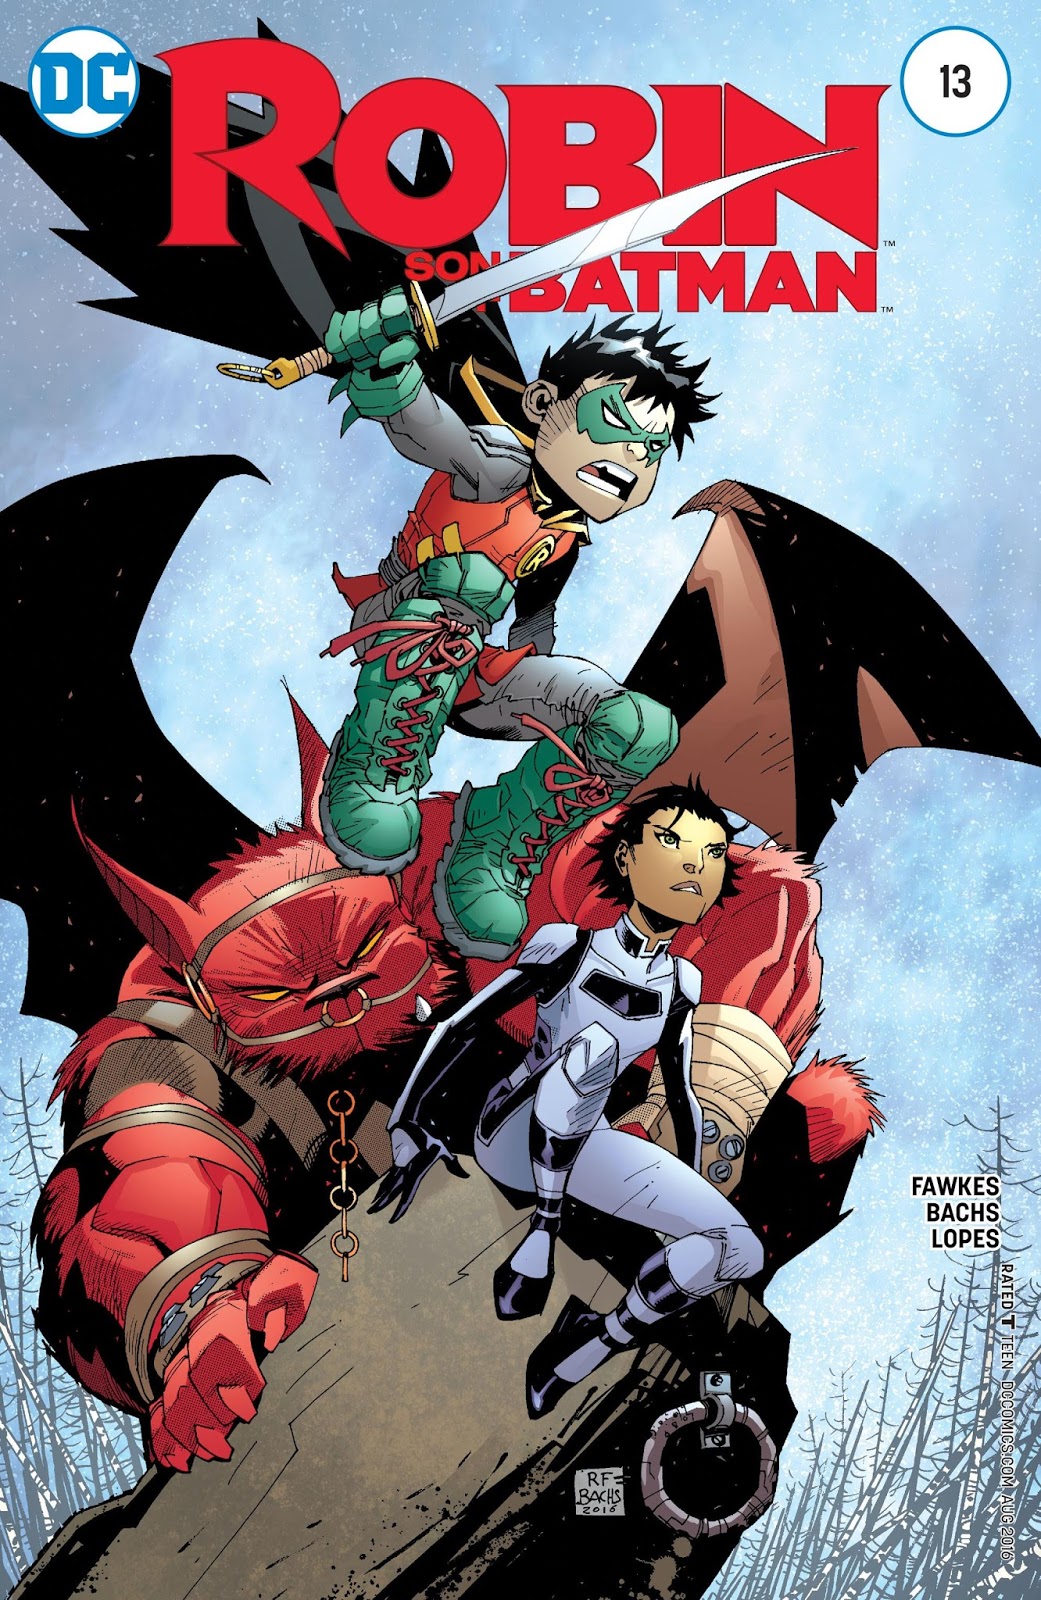 Weird Science DC Comics: Robin: Son of Batman #13 Review and *SPOILERS*